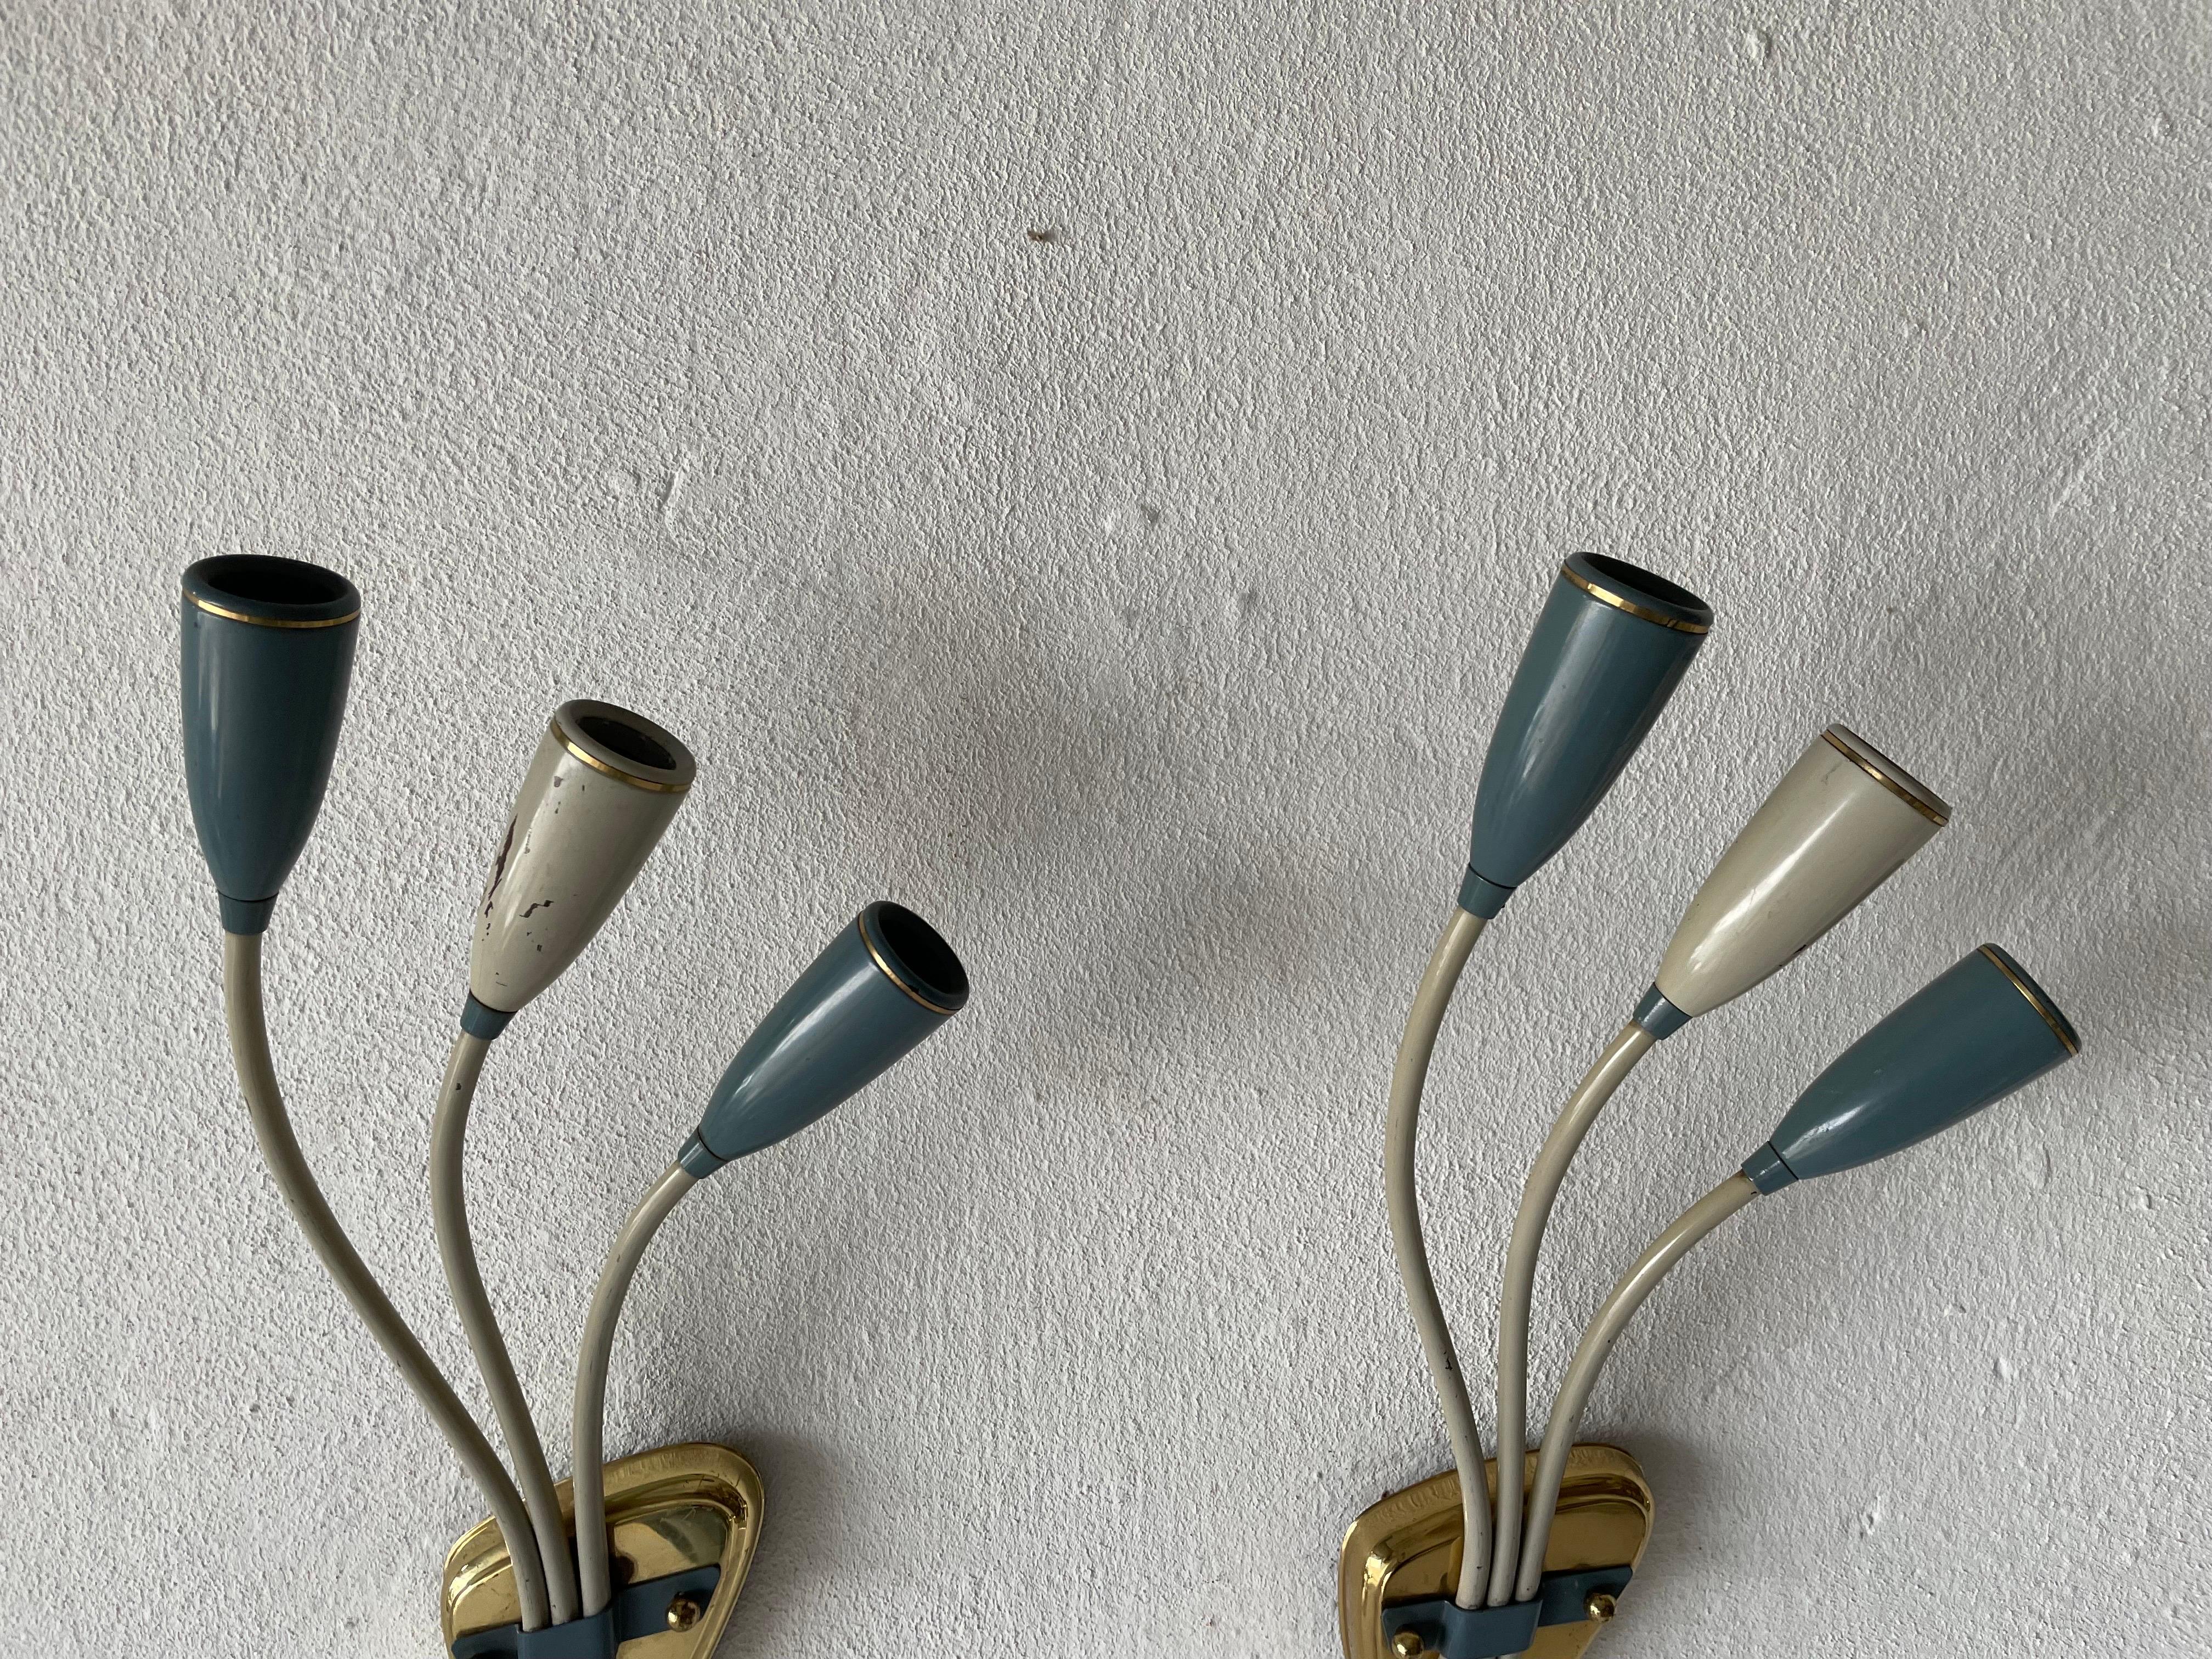 3-head Blue and White Metal Pair of Sputnik Sconces, 1950s, Germany For Sale 3